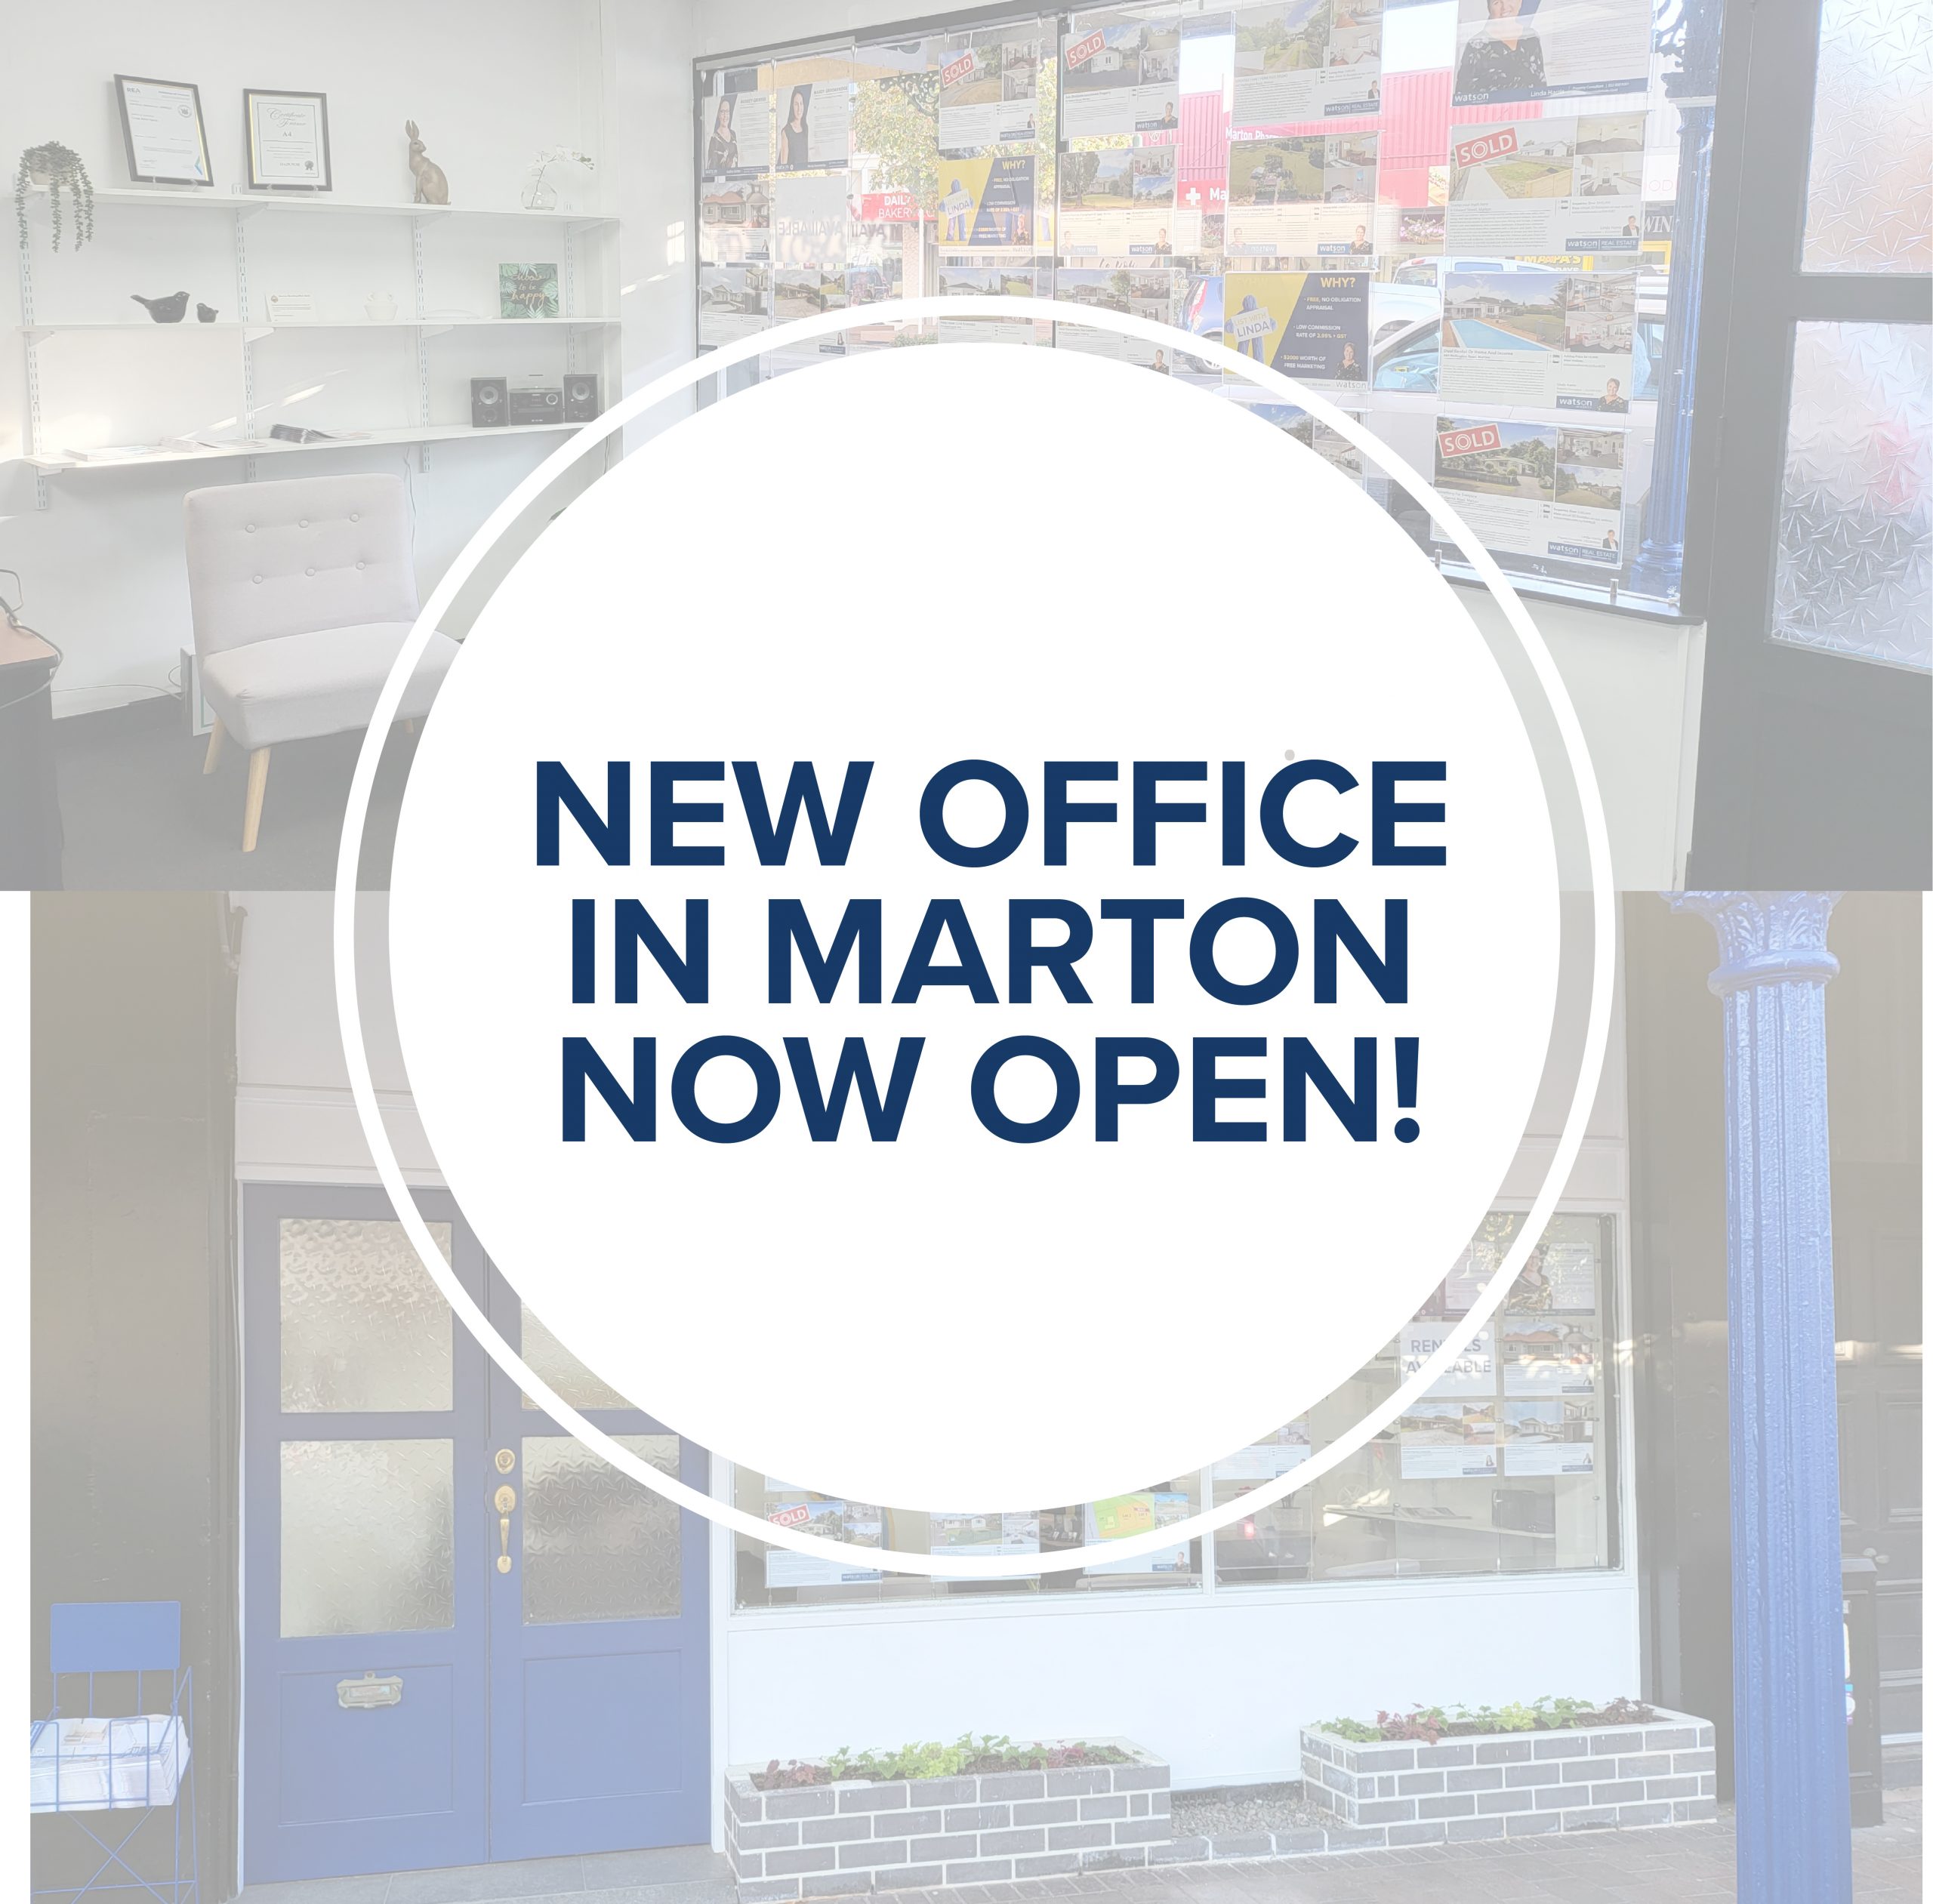 New Office in Marton Now Open